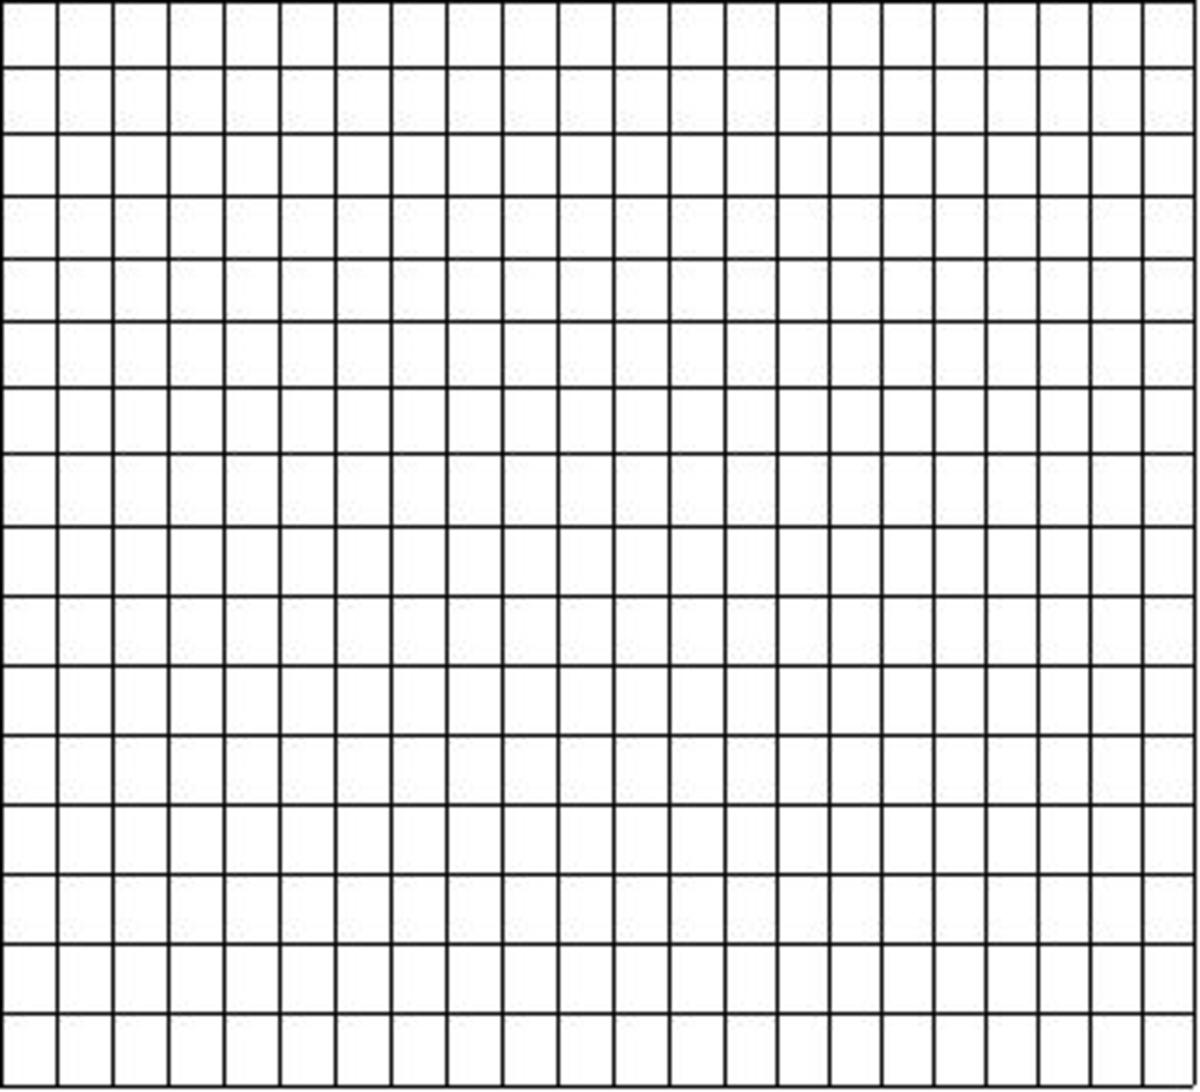 Create Your Own Word Search Printable Klosend